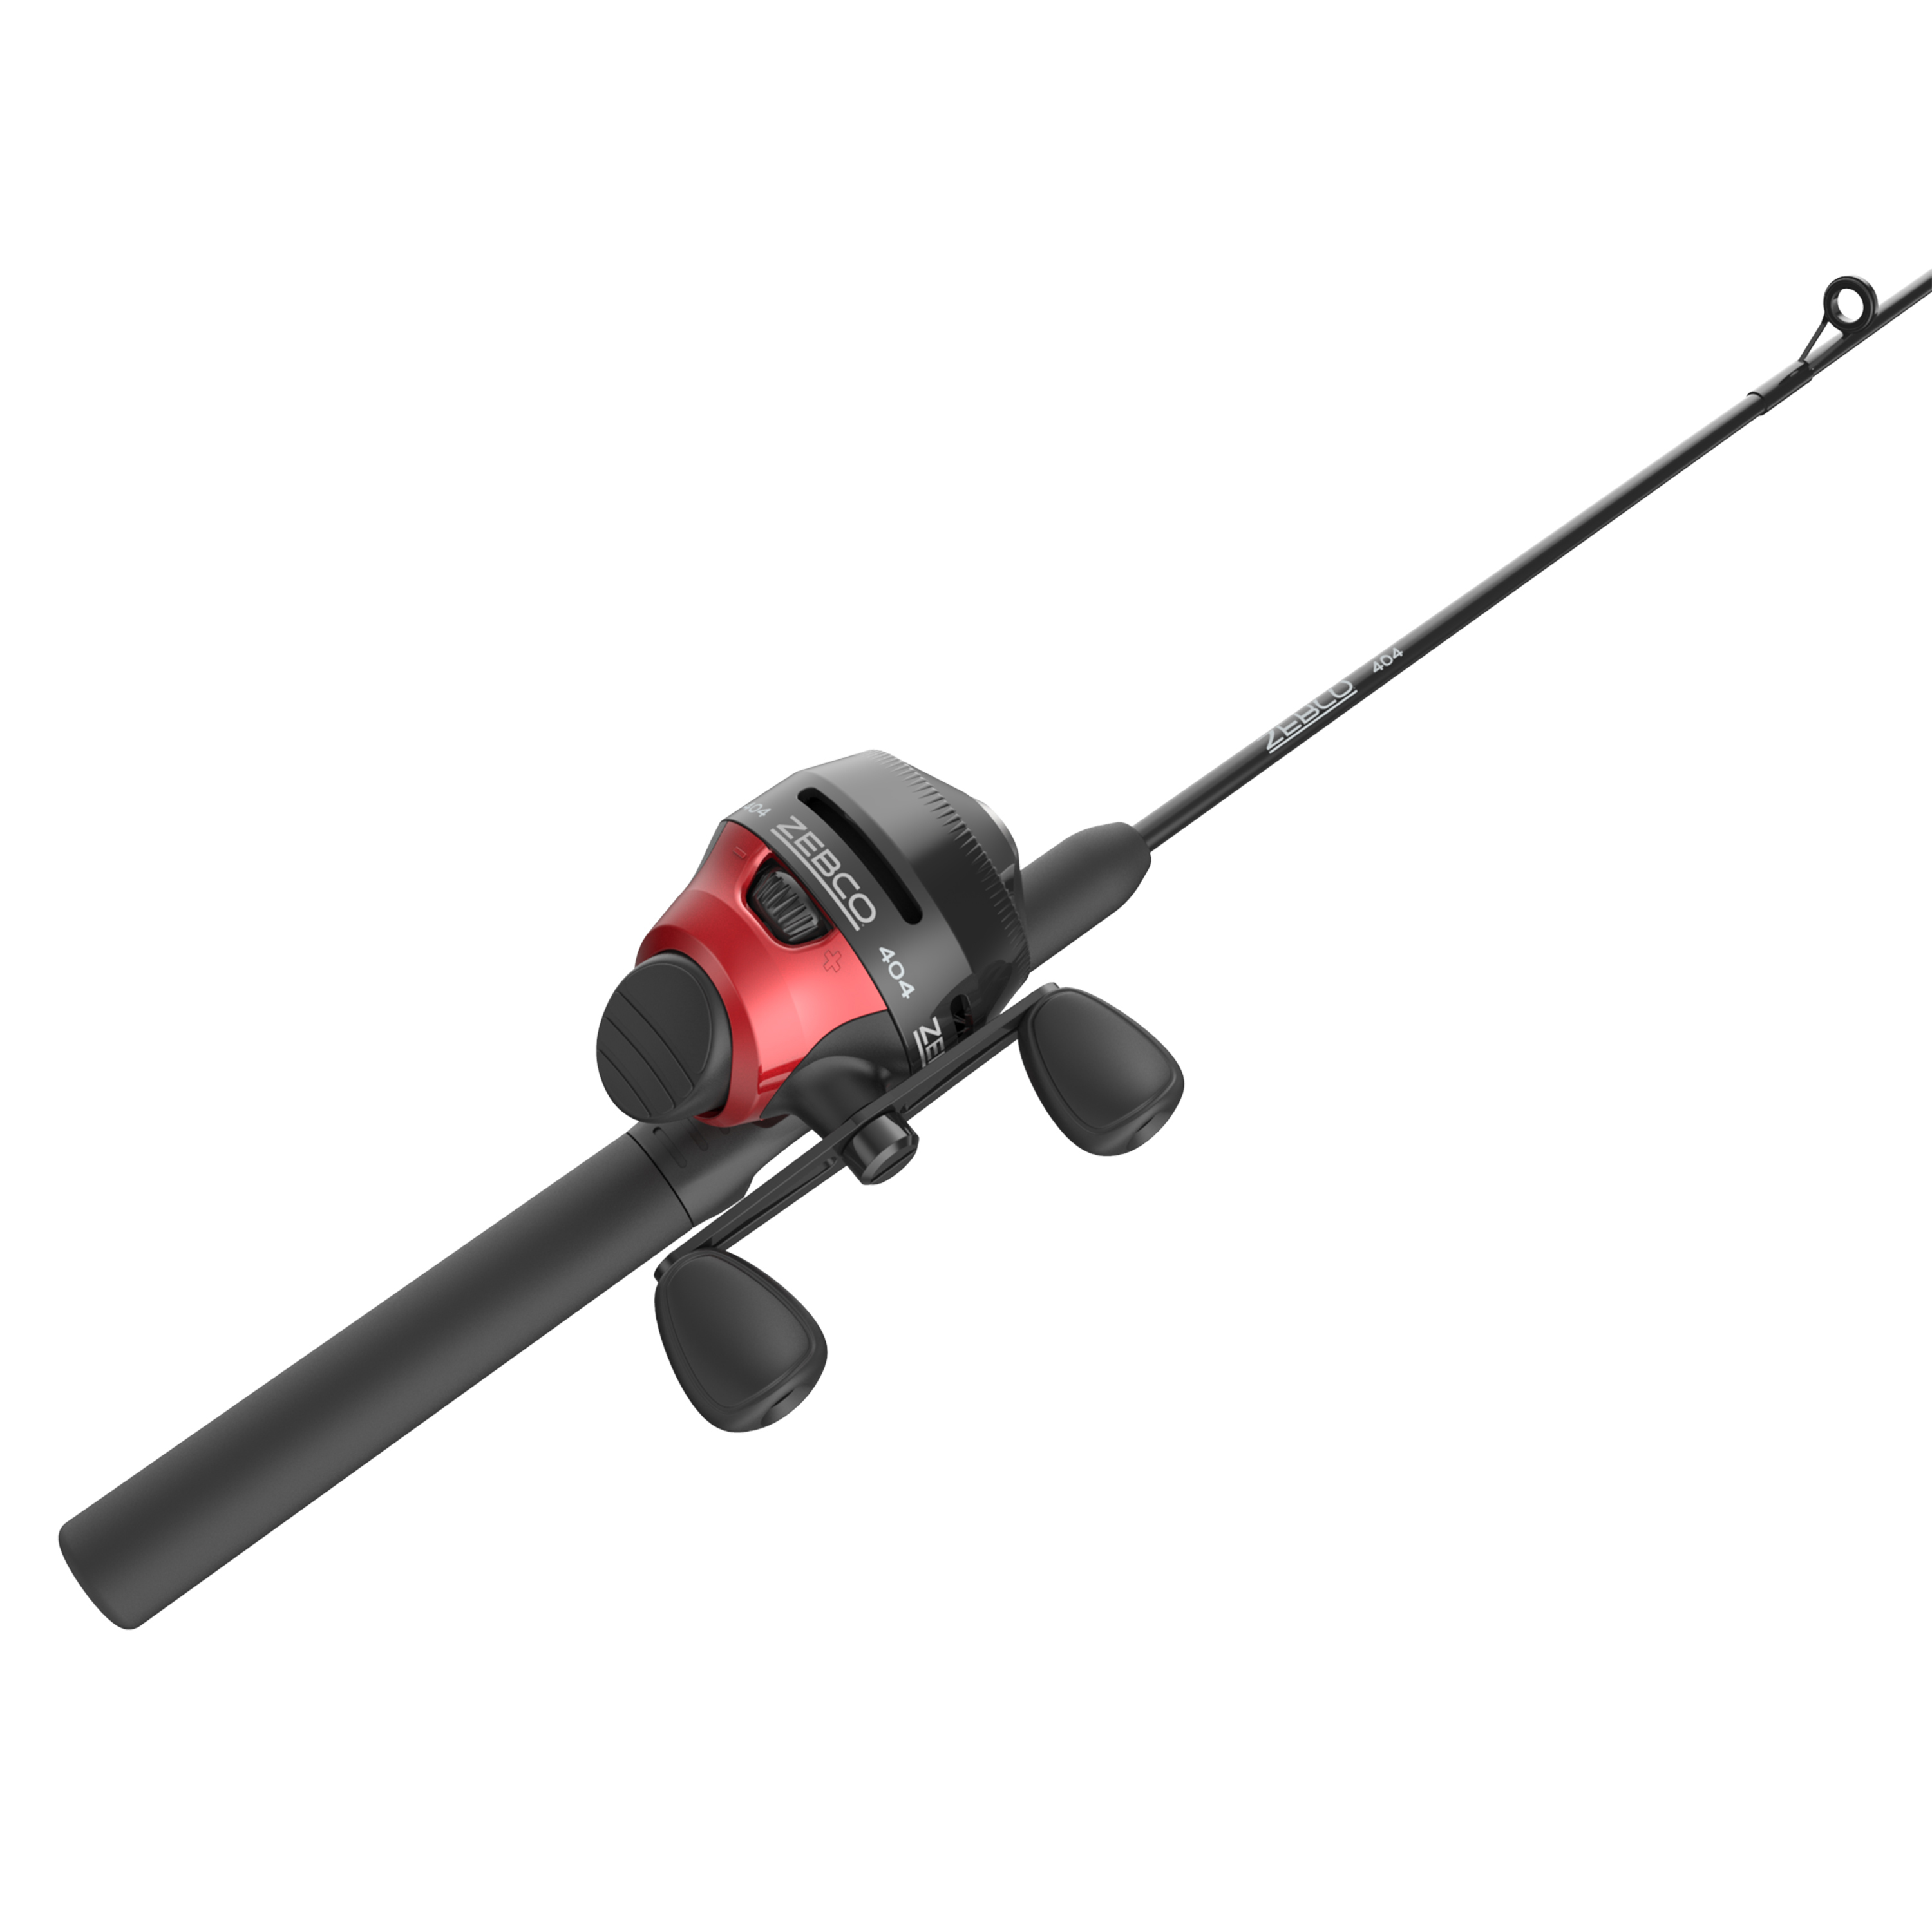 Zebco 202 Spincast Reel and Fishing Rod Combo, 5-Foot 6-Inch 2-Piece Fishing  Pole, Size 30 Reel, Right-Hand Retrieve, Pre-Spooled with 10-Pound Cajun  Line, Includes 27-Piece Tackle Kit, Black/Red 